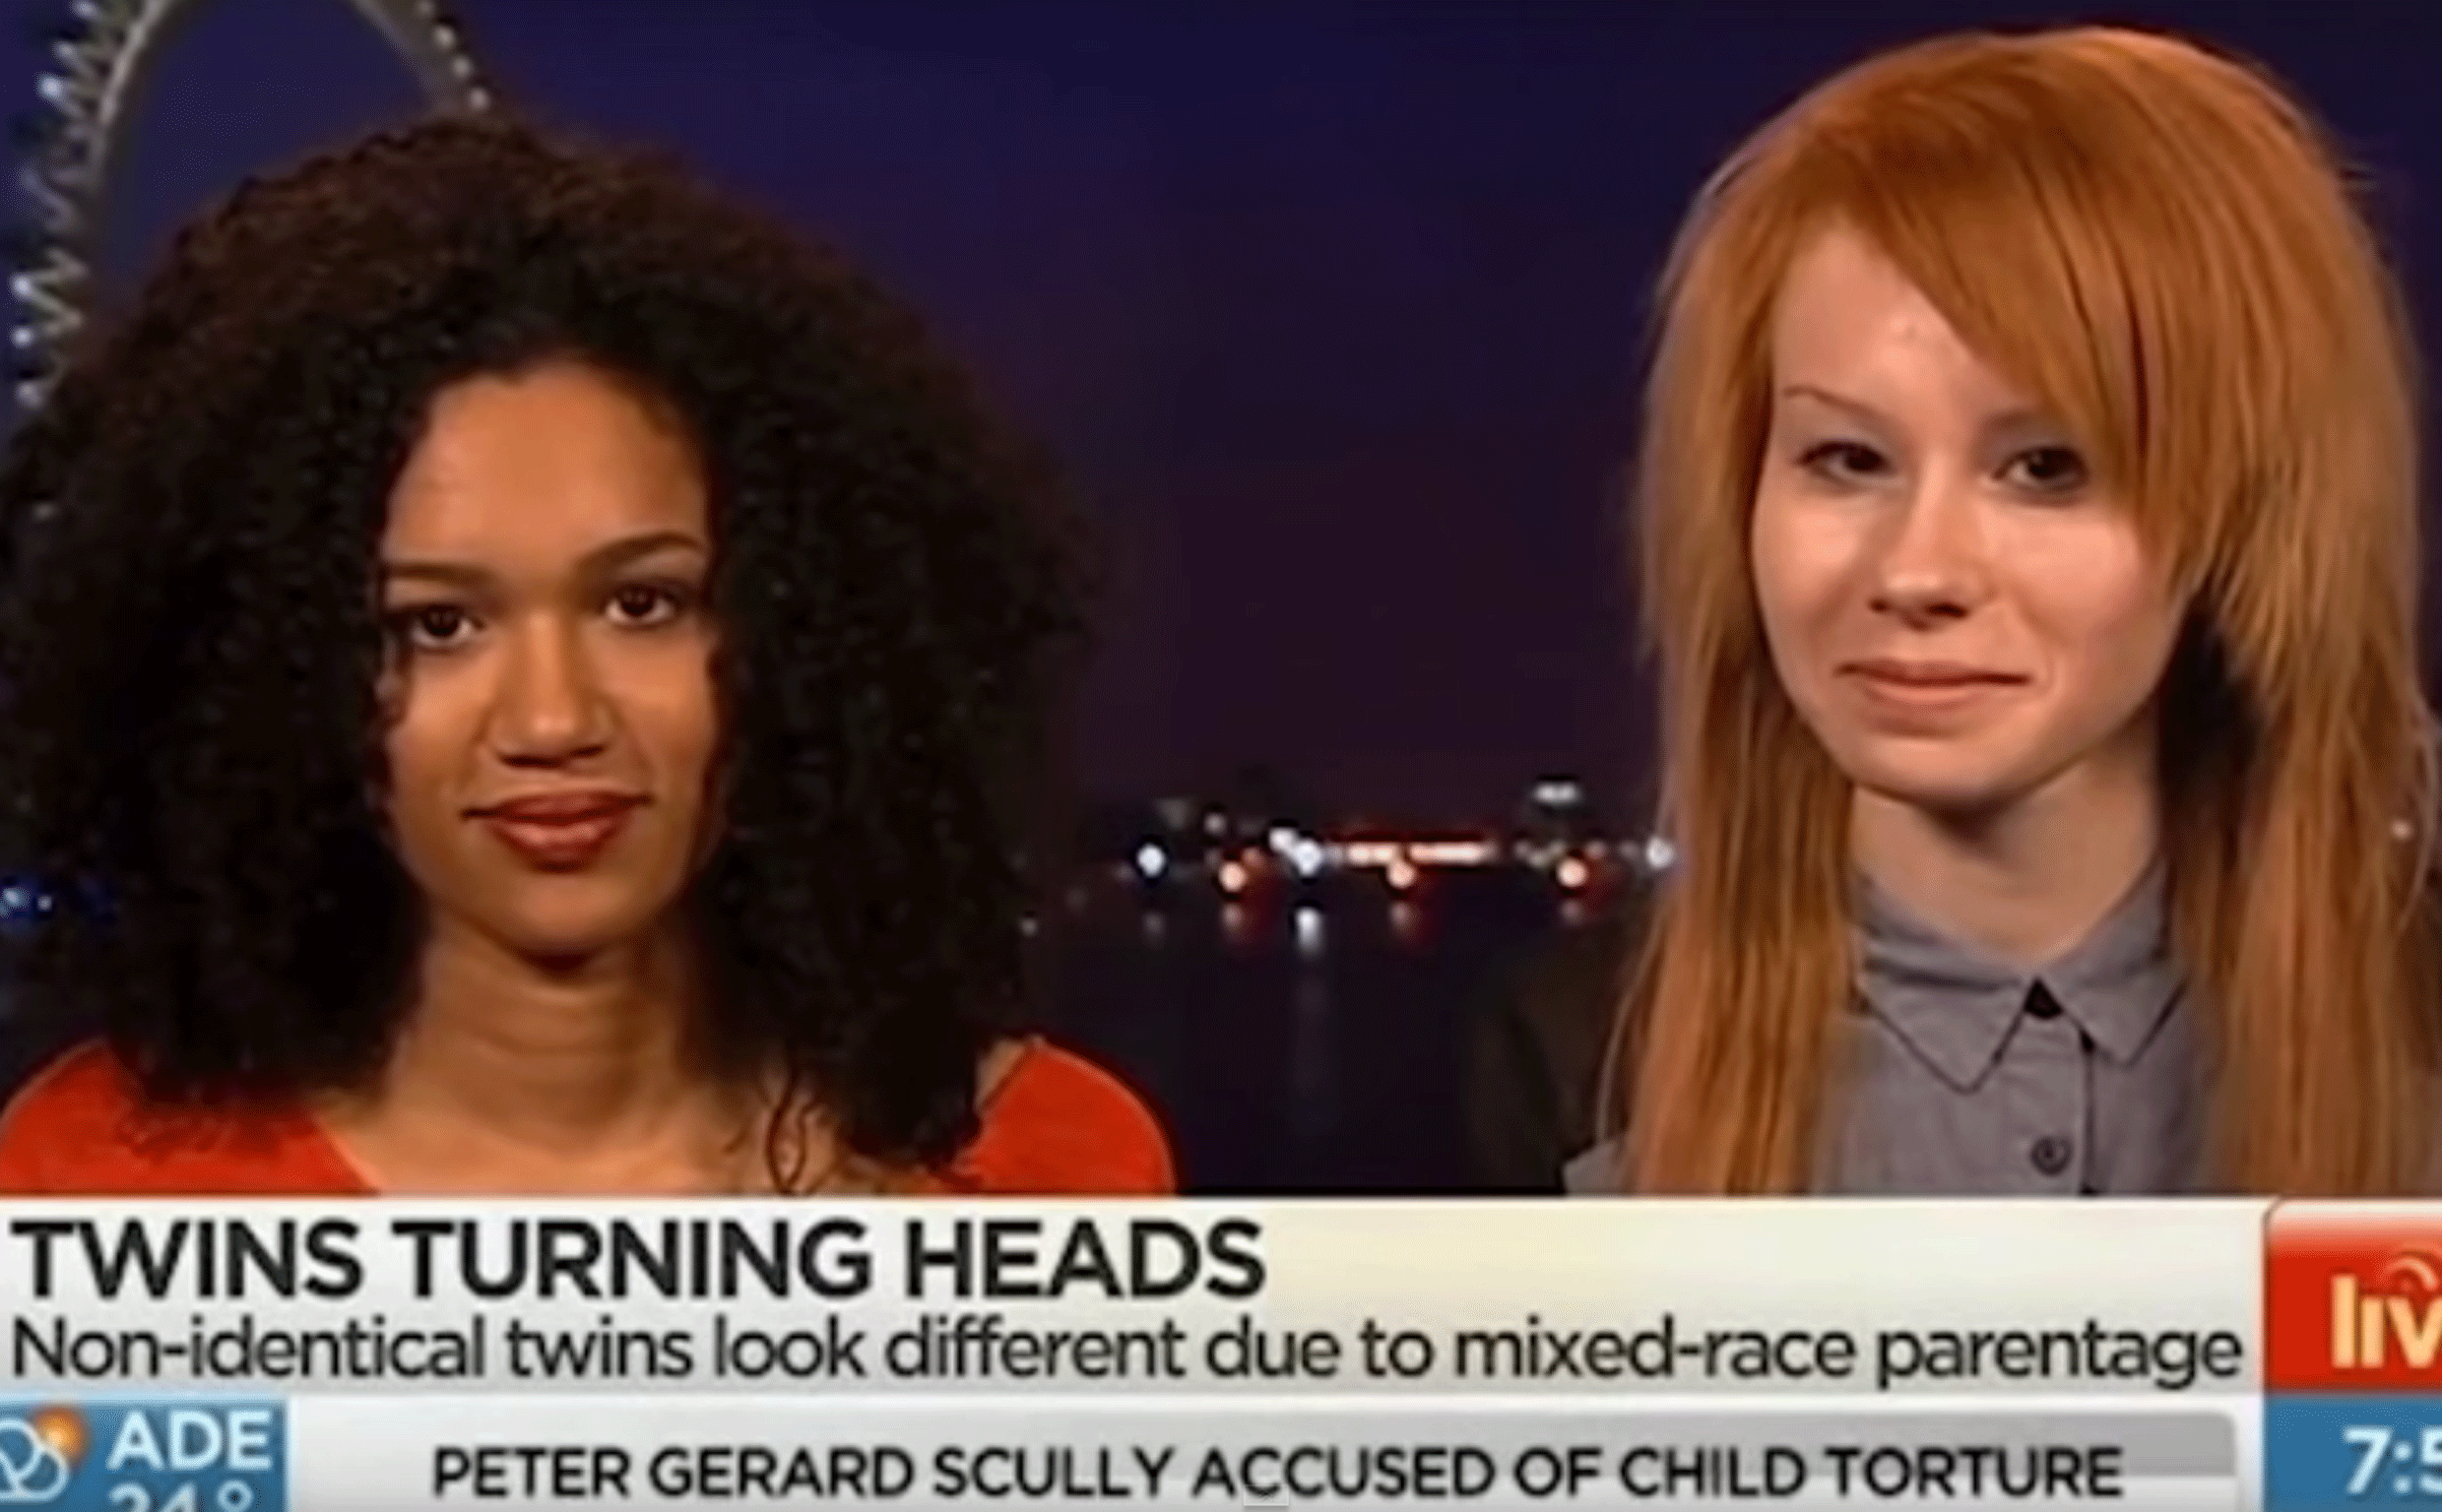 Maria and Lucy Aylmer, who are non-identical twins born to mixed race parents